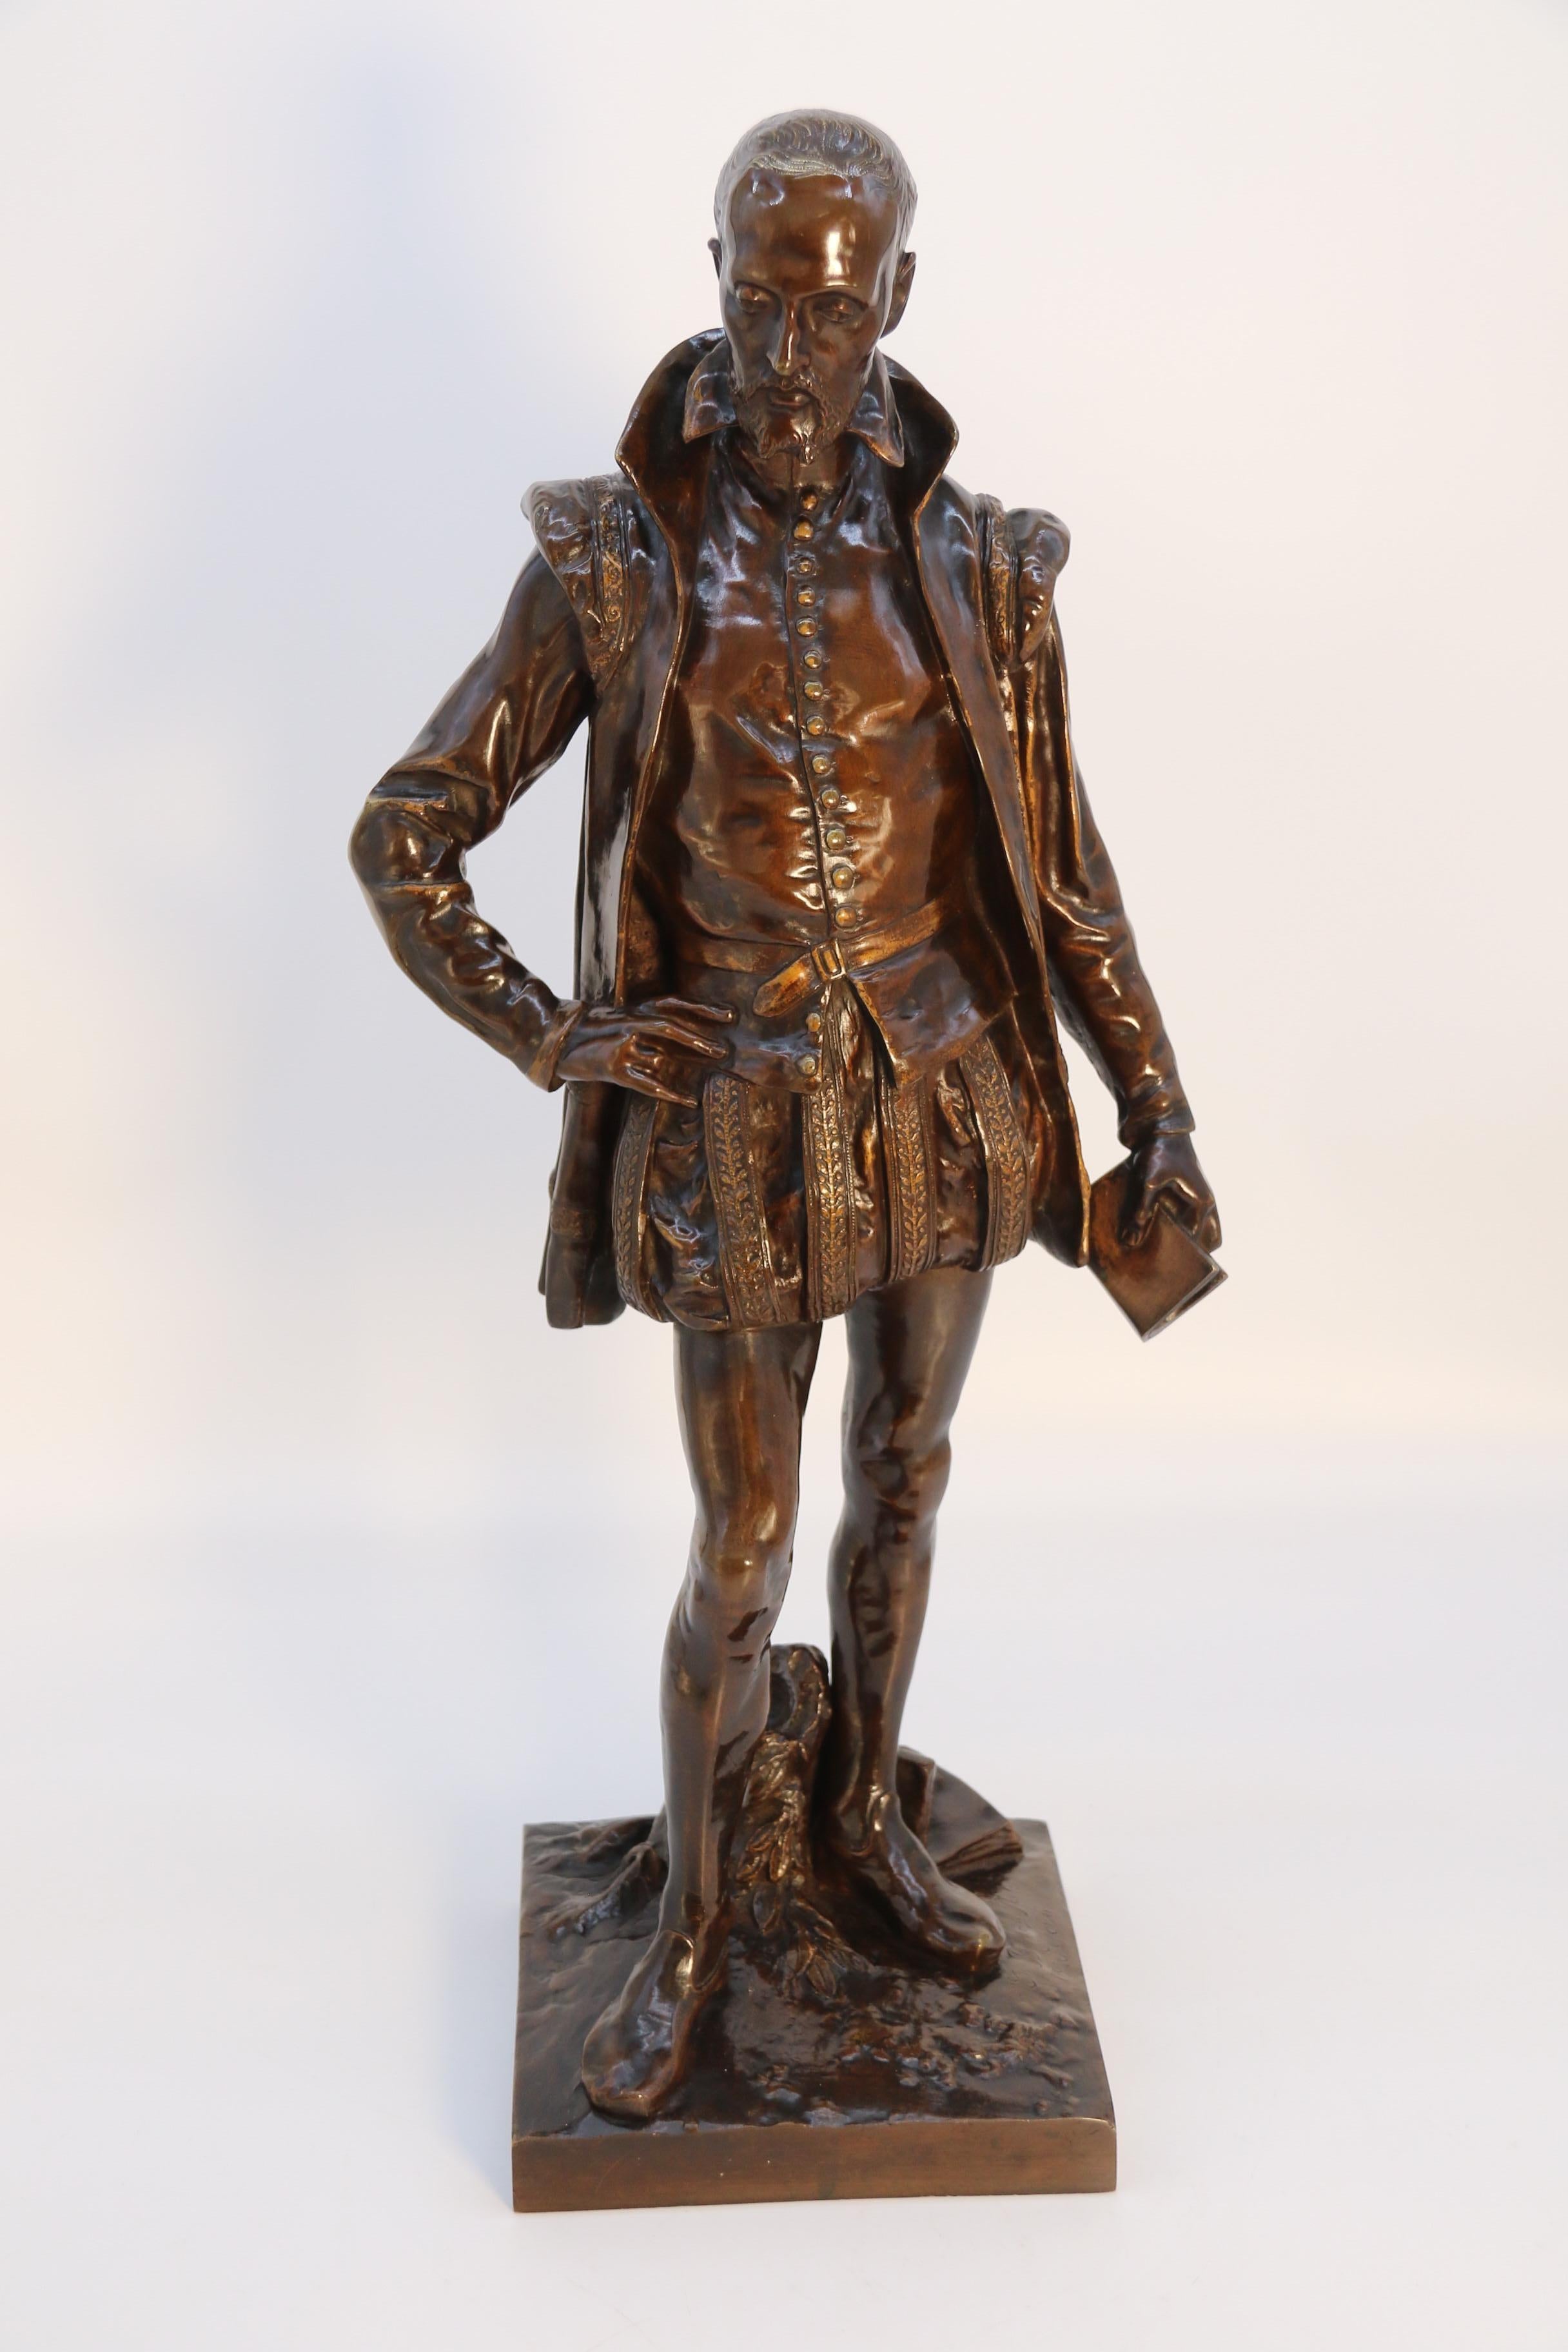 A large 19th century bronze study of the sixteenth century French poet Joachim de Bellay by the sculptor Leofanti Adolphe.

This stunning large bronze study depicts the famous sixteenth century French poet Joachim de Ballay who was working in the